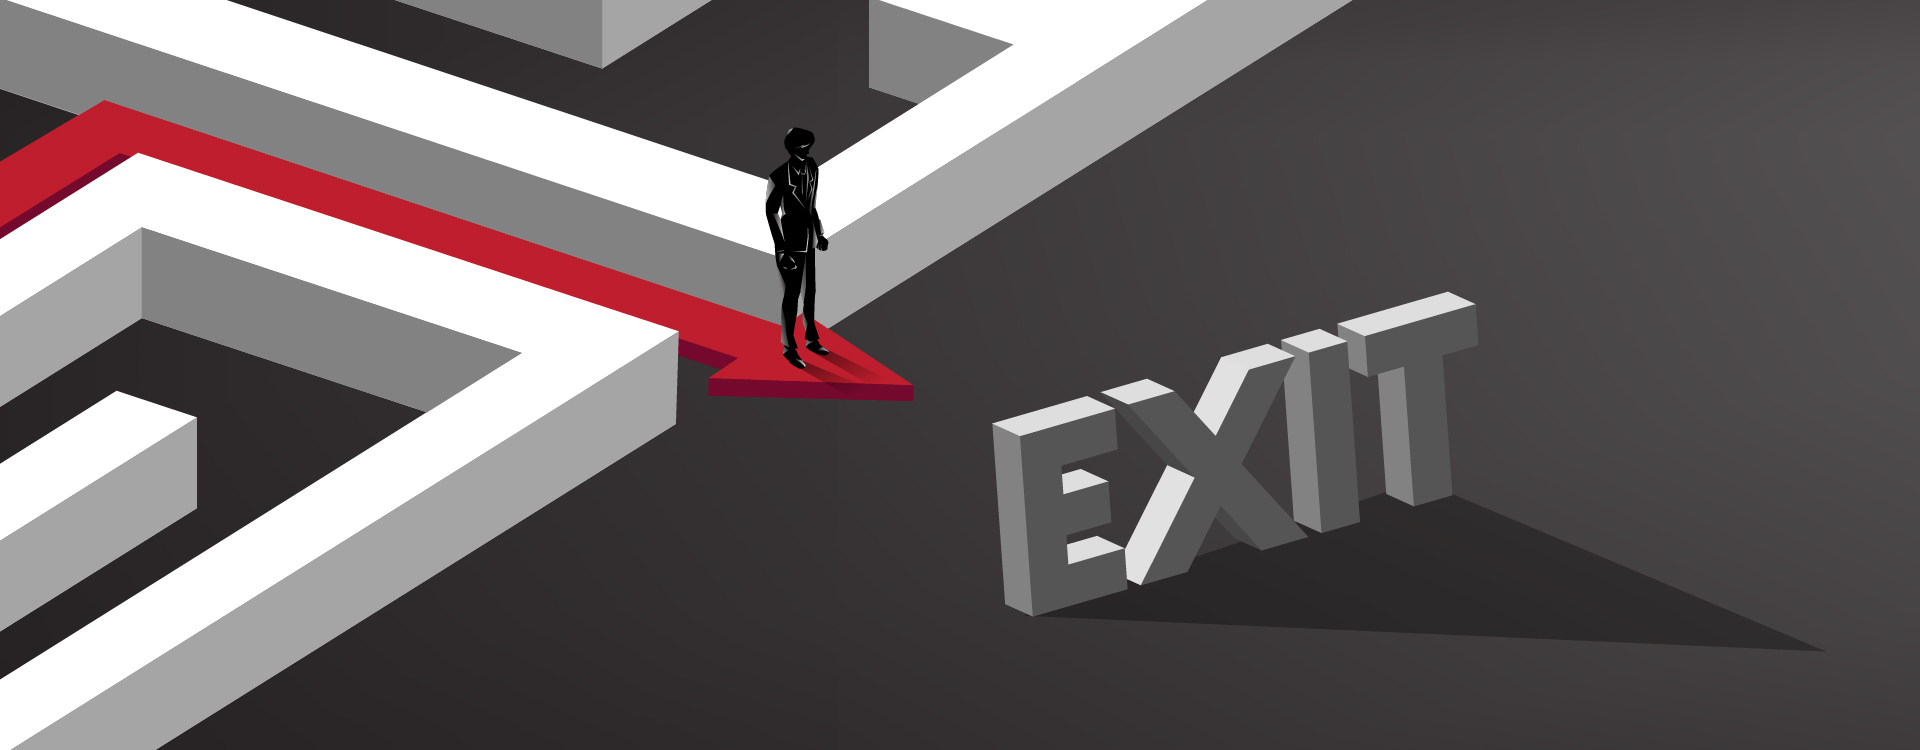 Make Exit by Liquidation: How Business Exit can be Rewarding?